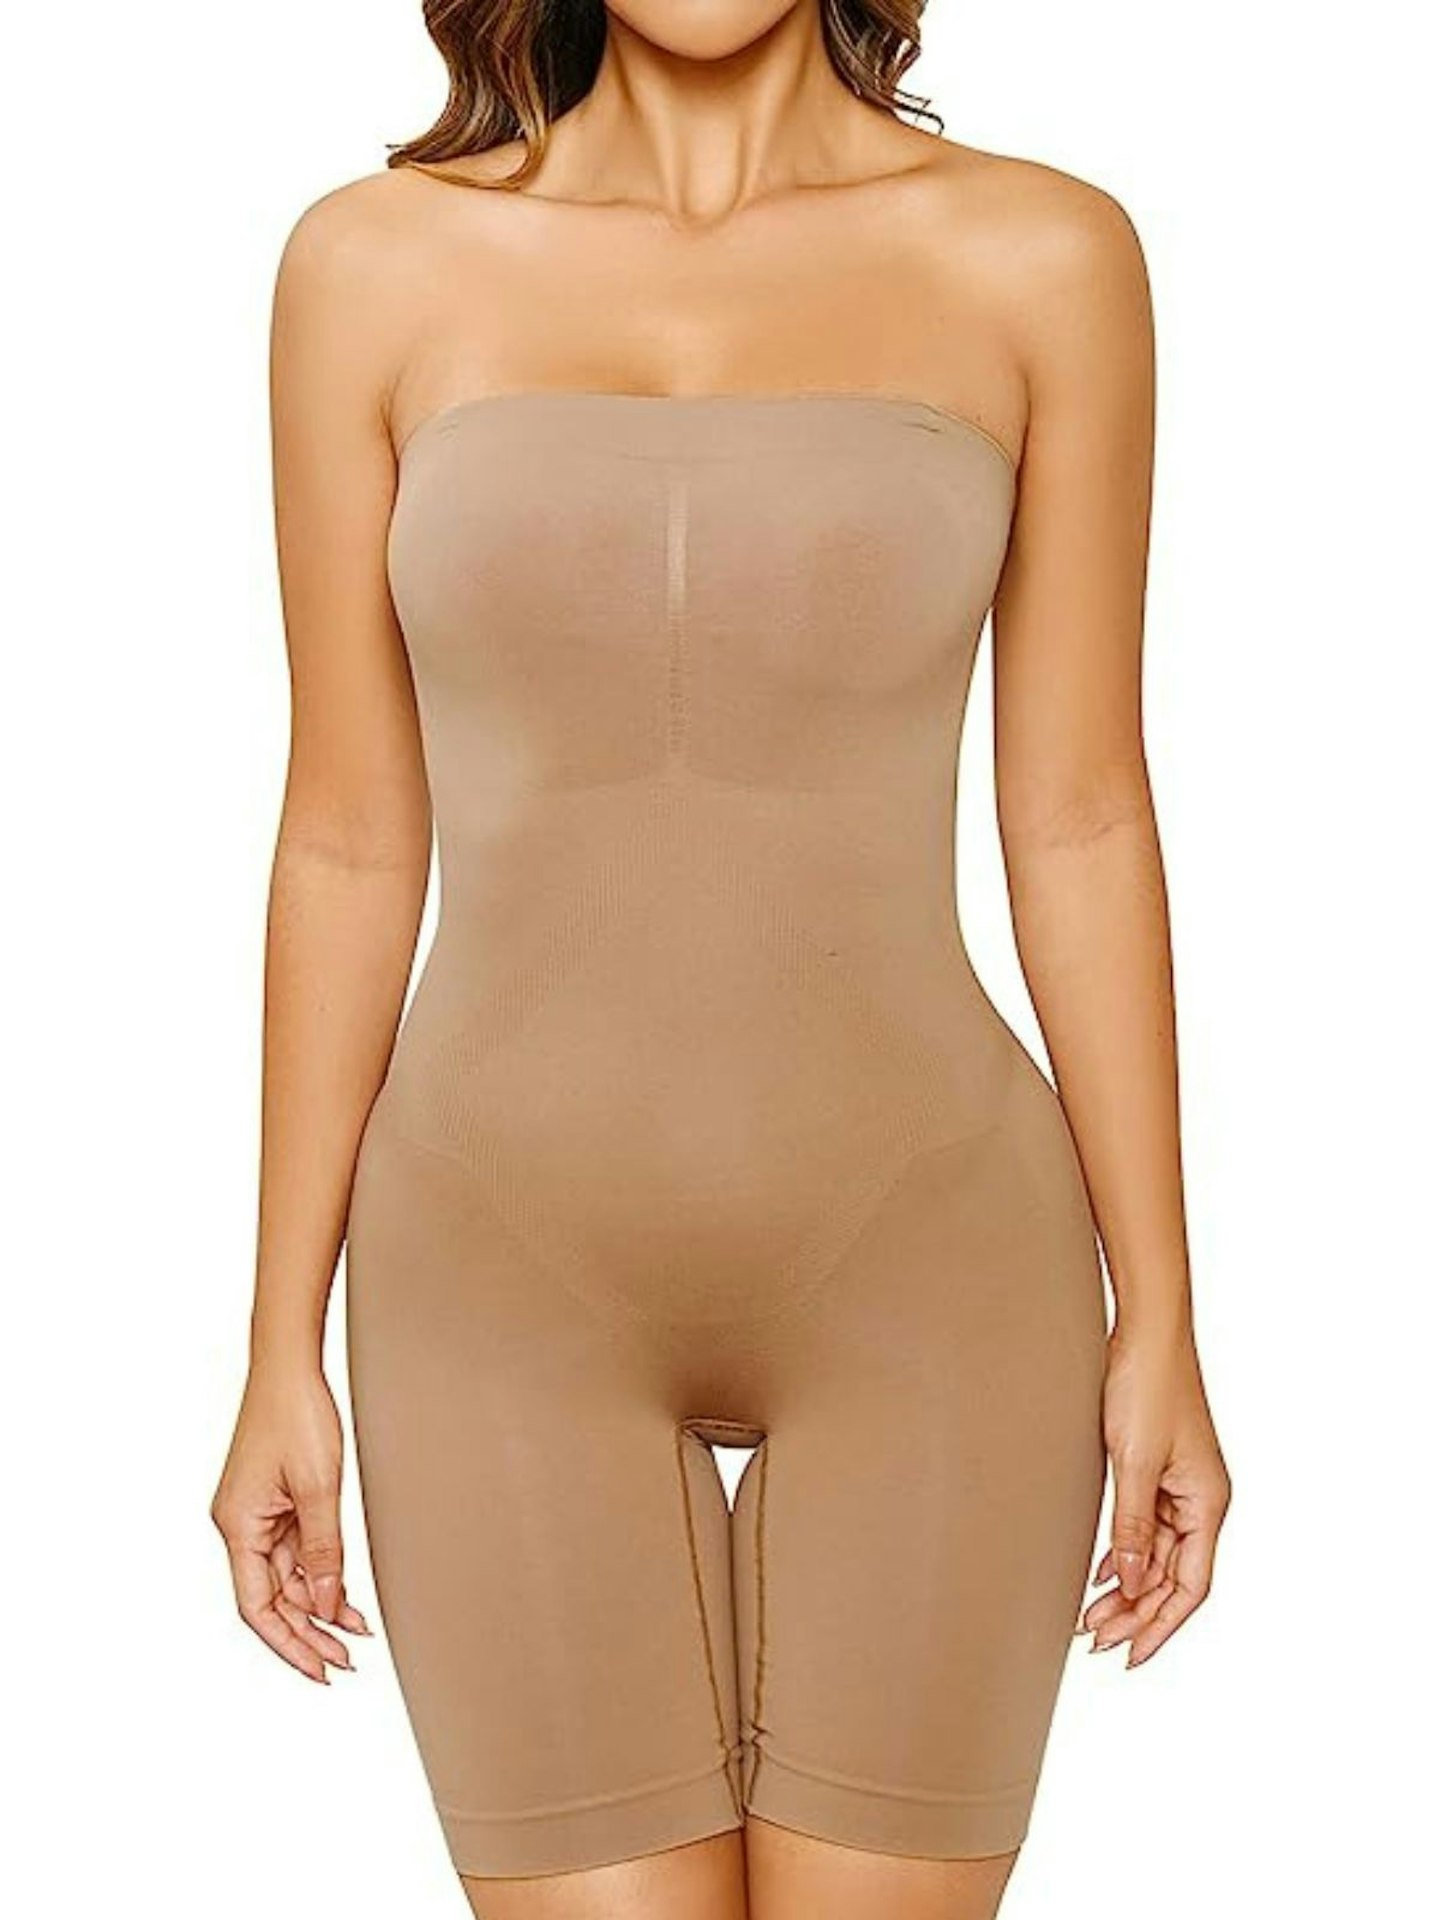 MAGISCULPT Firm Control Shapewear Multiway Wired Padded Body